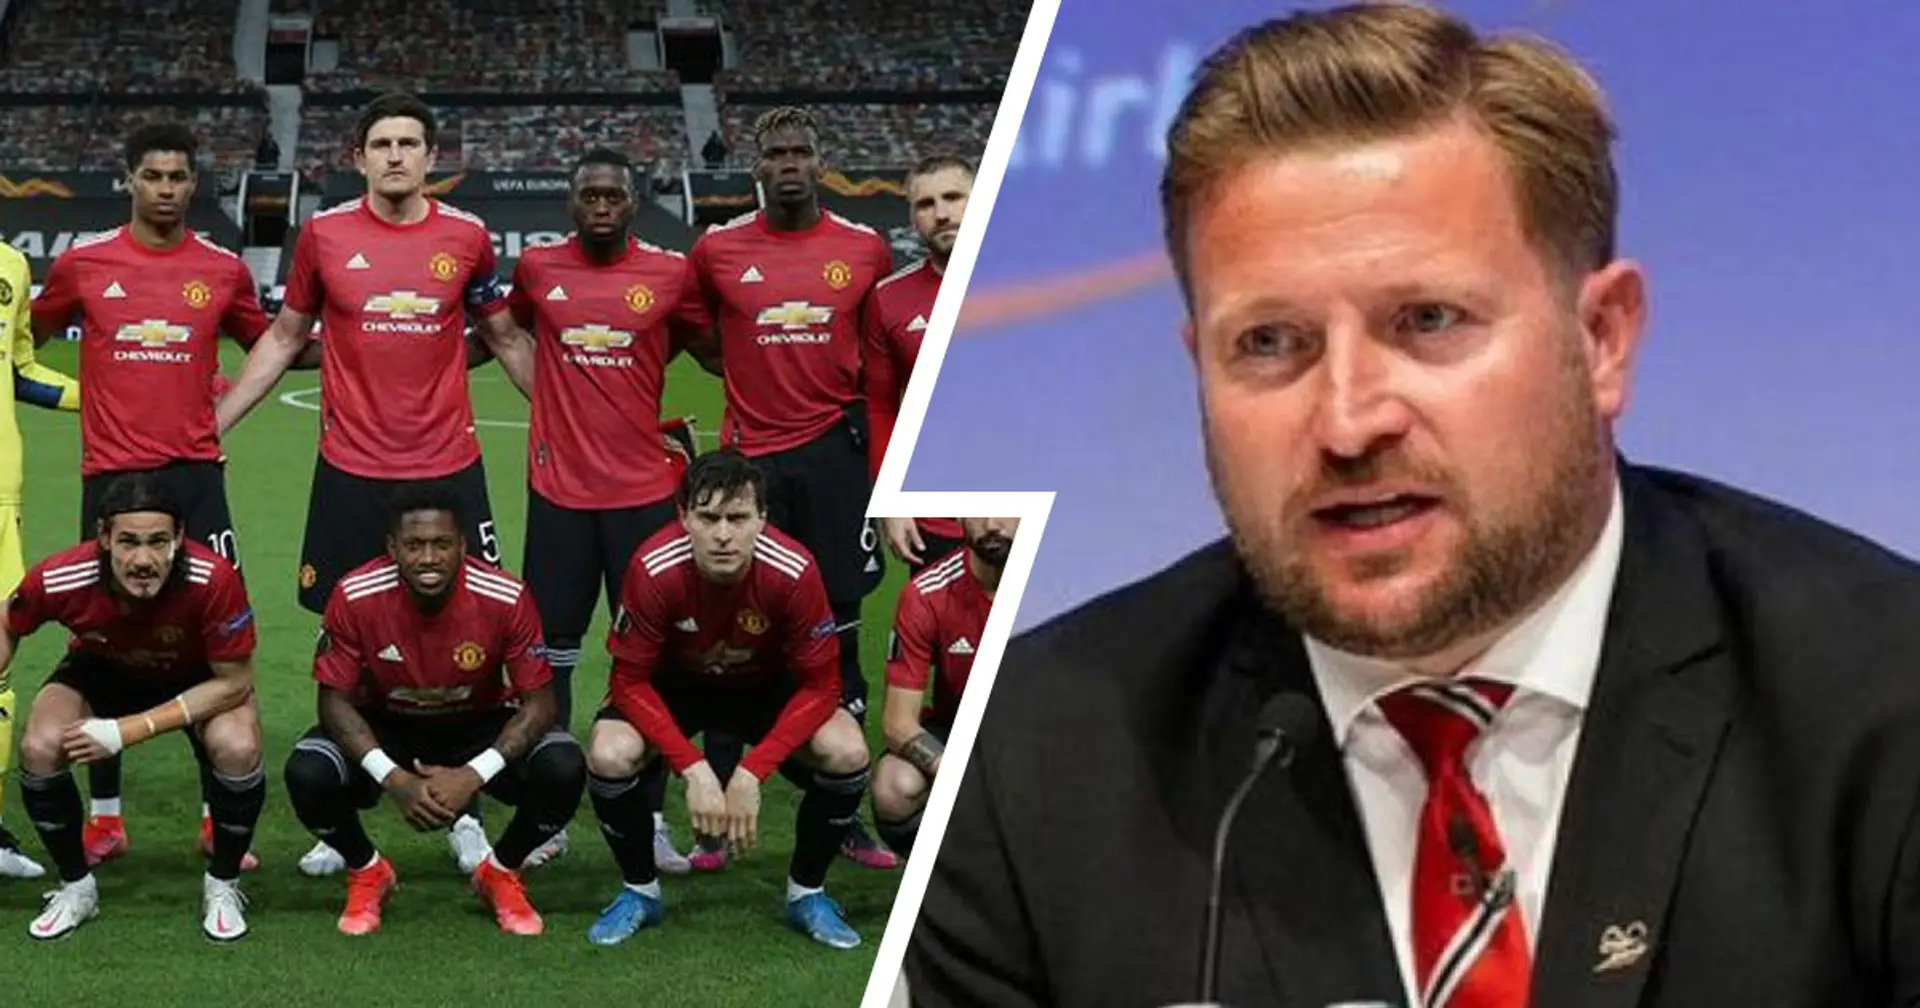 Richard Arnold confirms two sources of Man United leaks ‘have left the club’